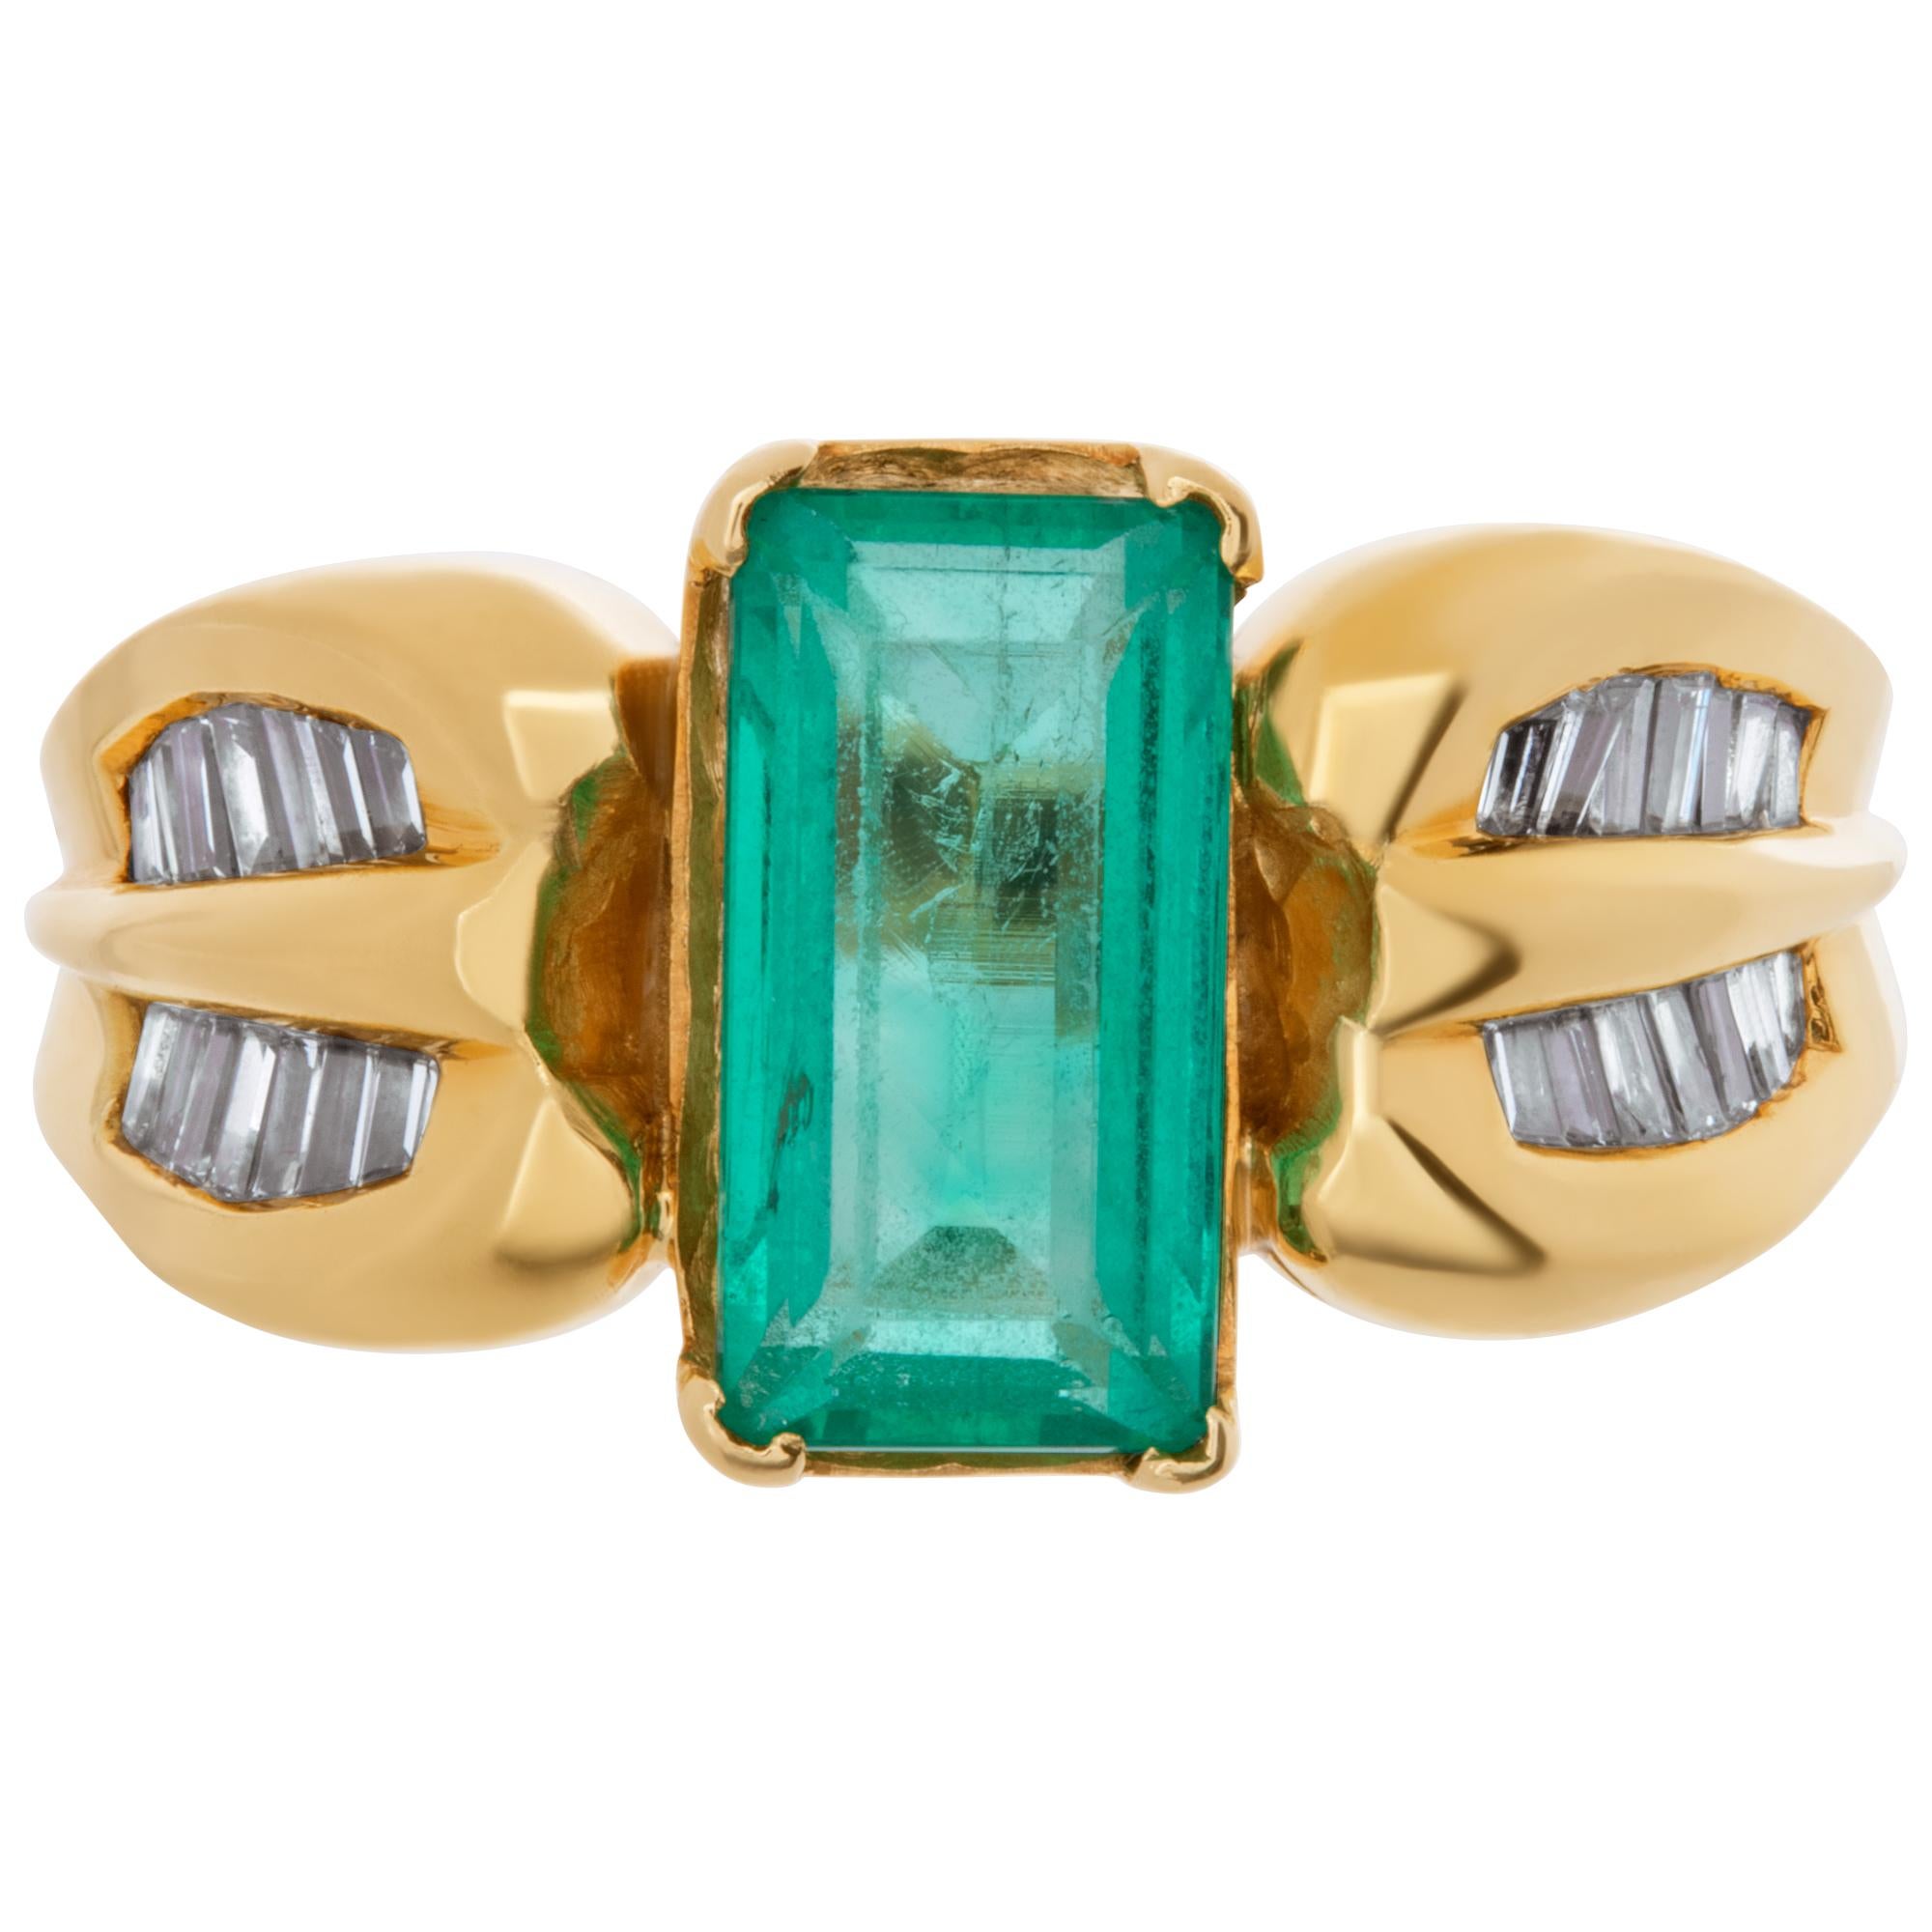 Rectangular cut emerald ring in 18k yellow gold with baguette cut diamond accents. Emerald is 2 carats and 0.60 baguette diamond total carat weight. Size 6.5This Emerald ring is currently size 7.25 and some items can be sized up or down, please ask!